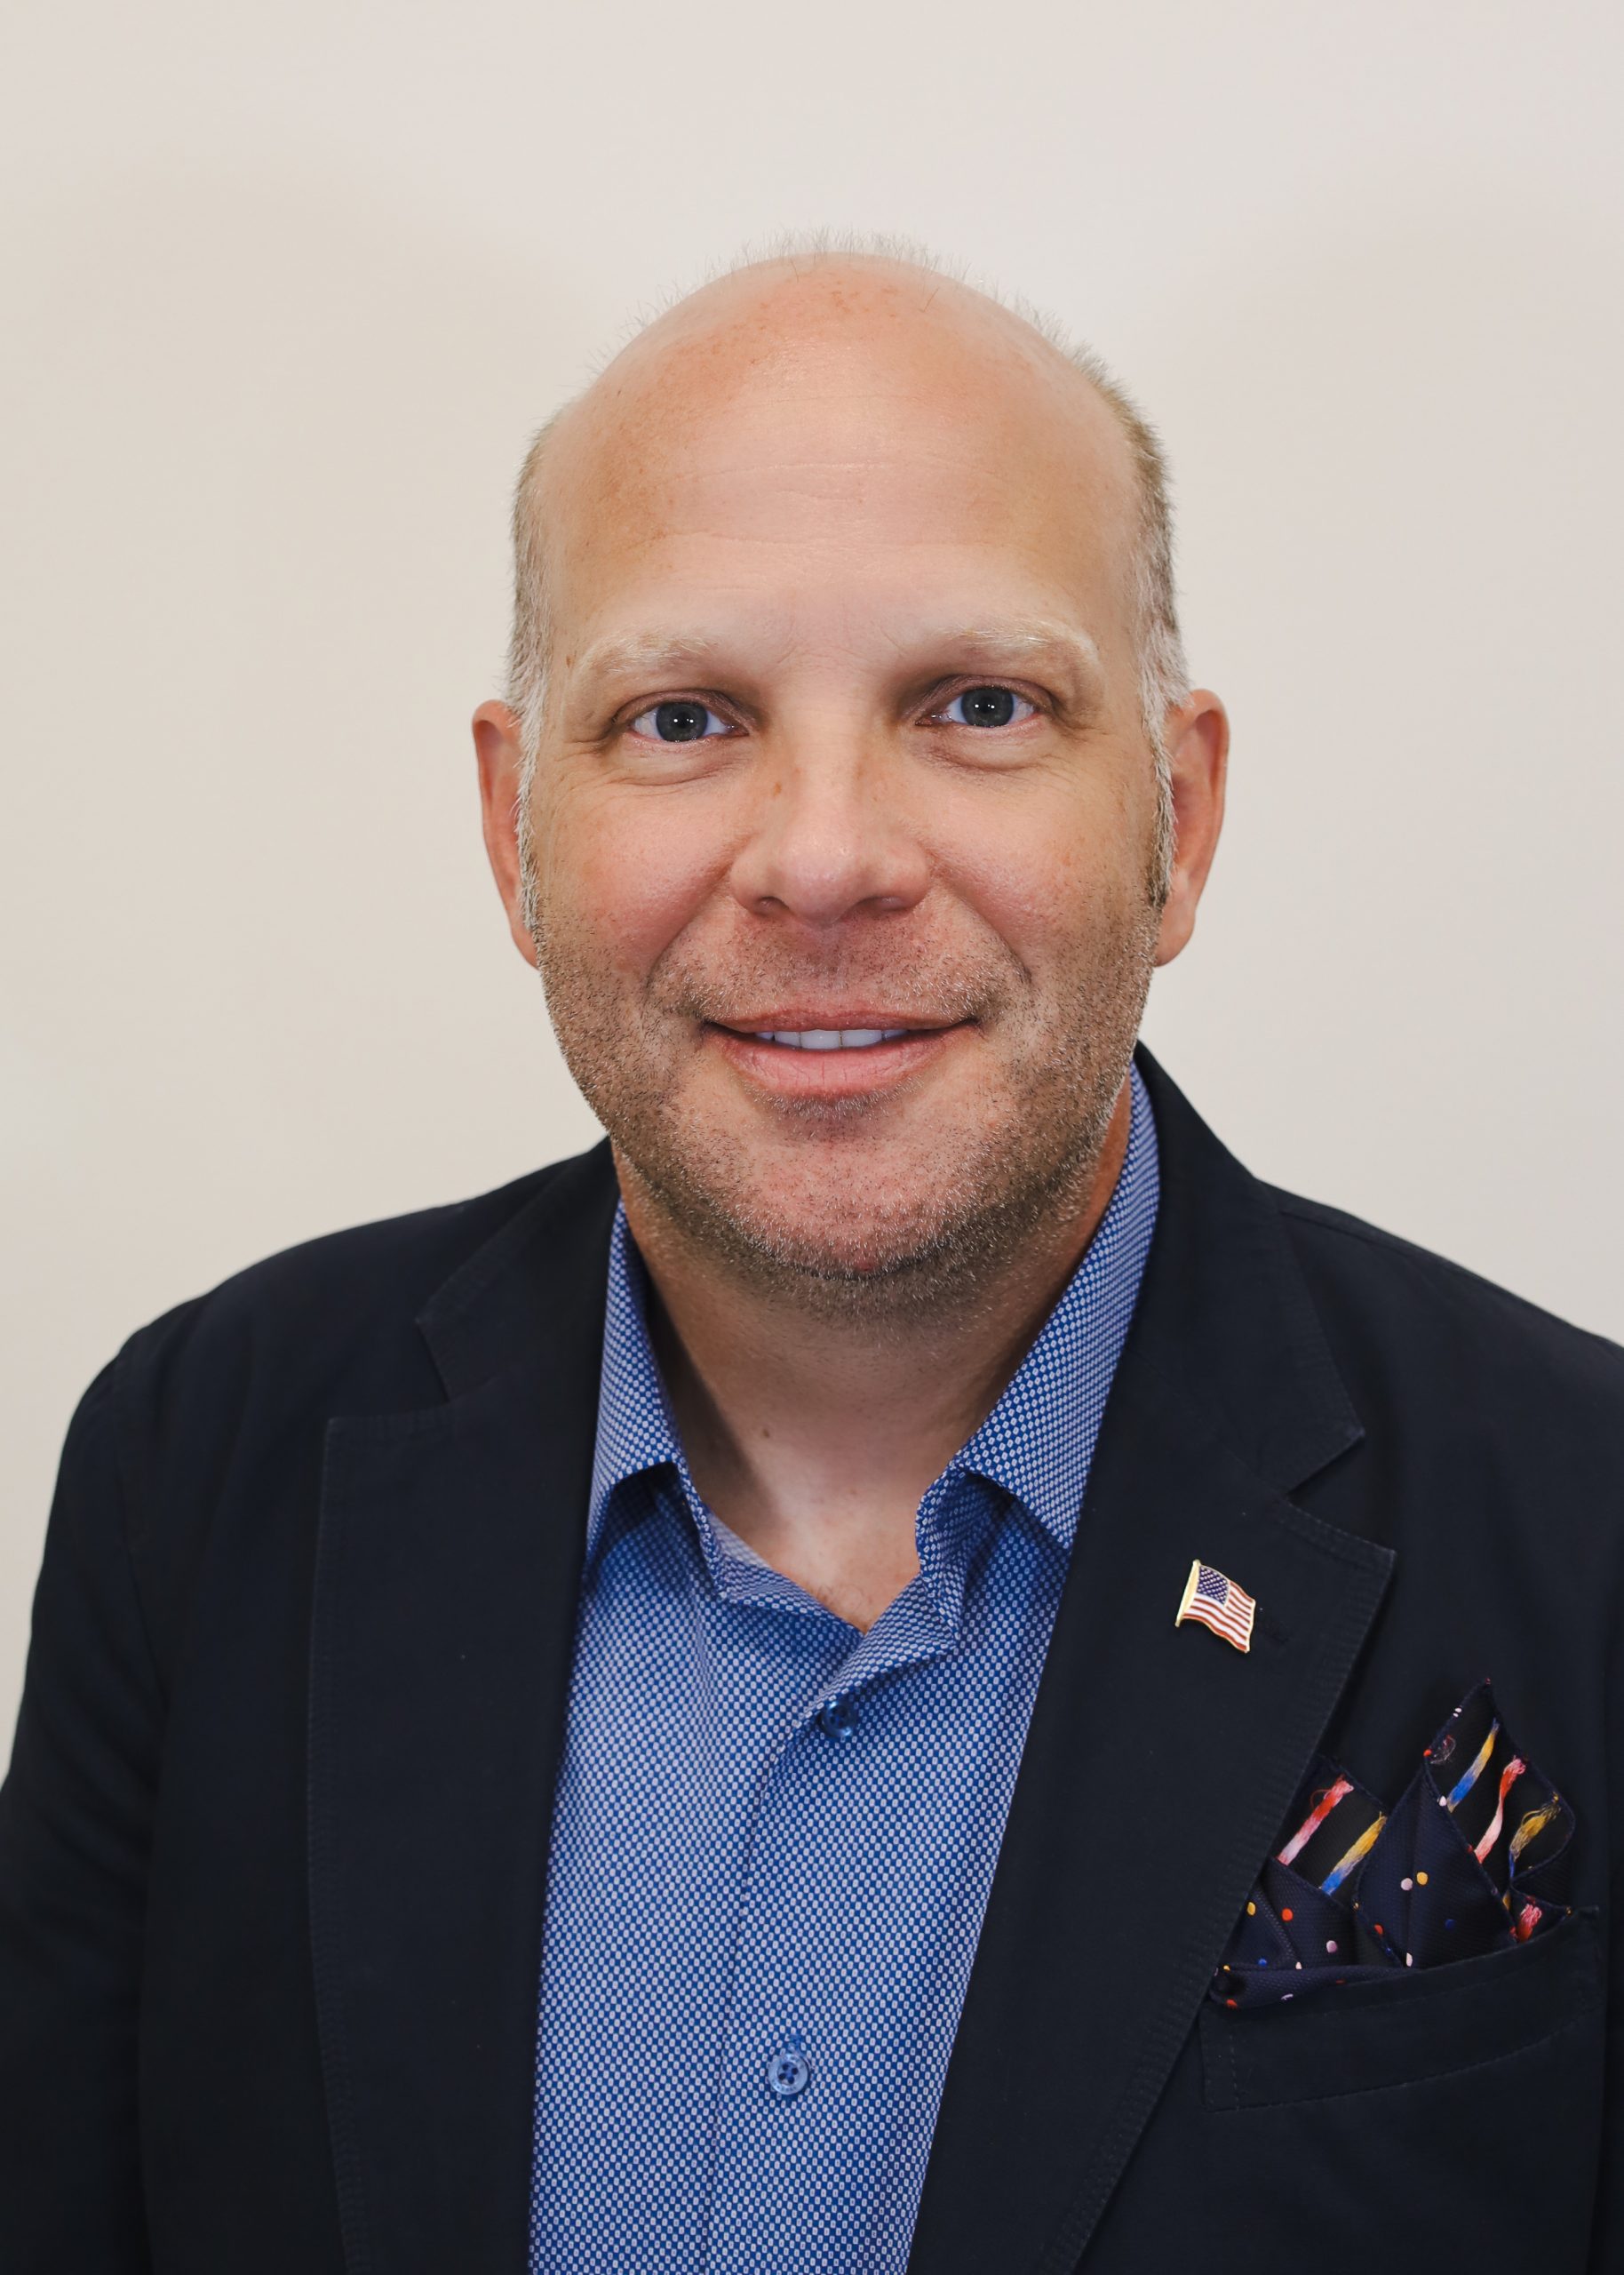 Portrait of a bald man in a navy blazer, blue shirt, and pocket square, smiling against a cream background, embodying the essence of Professional Consulting Services.